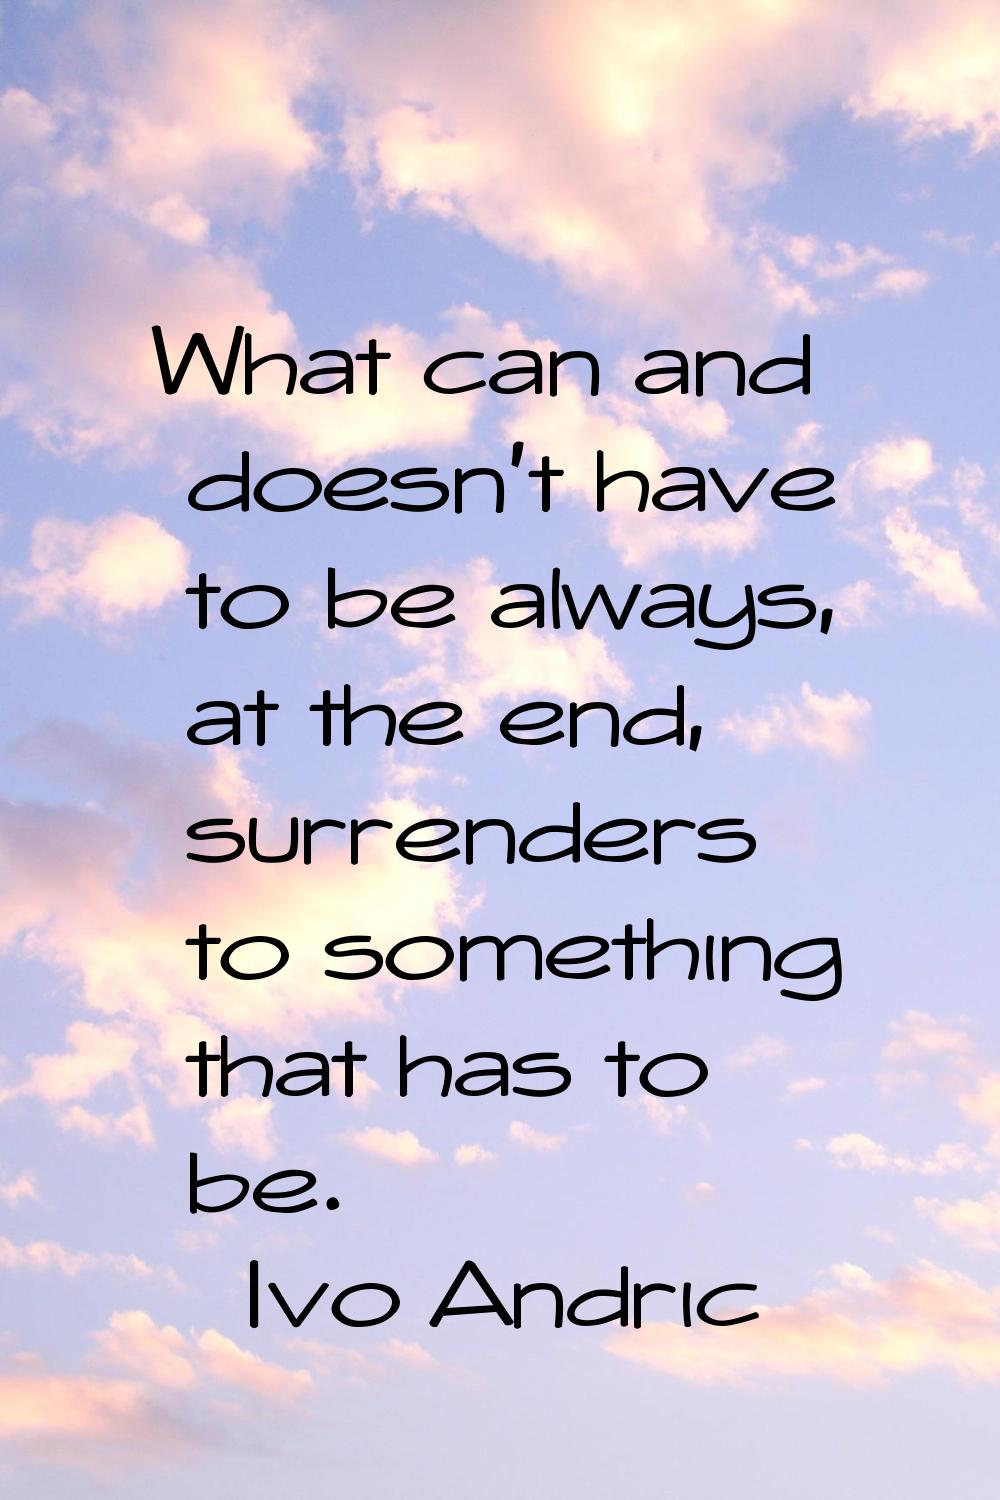 What can and doesn't have to be always, at the end, surrenders to something that has to be.